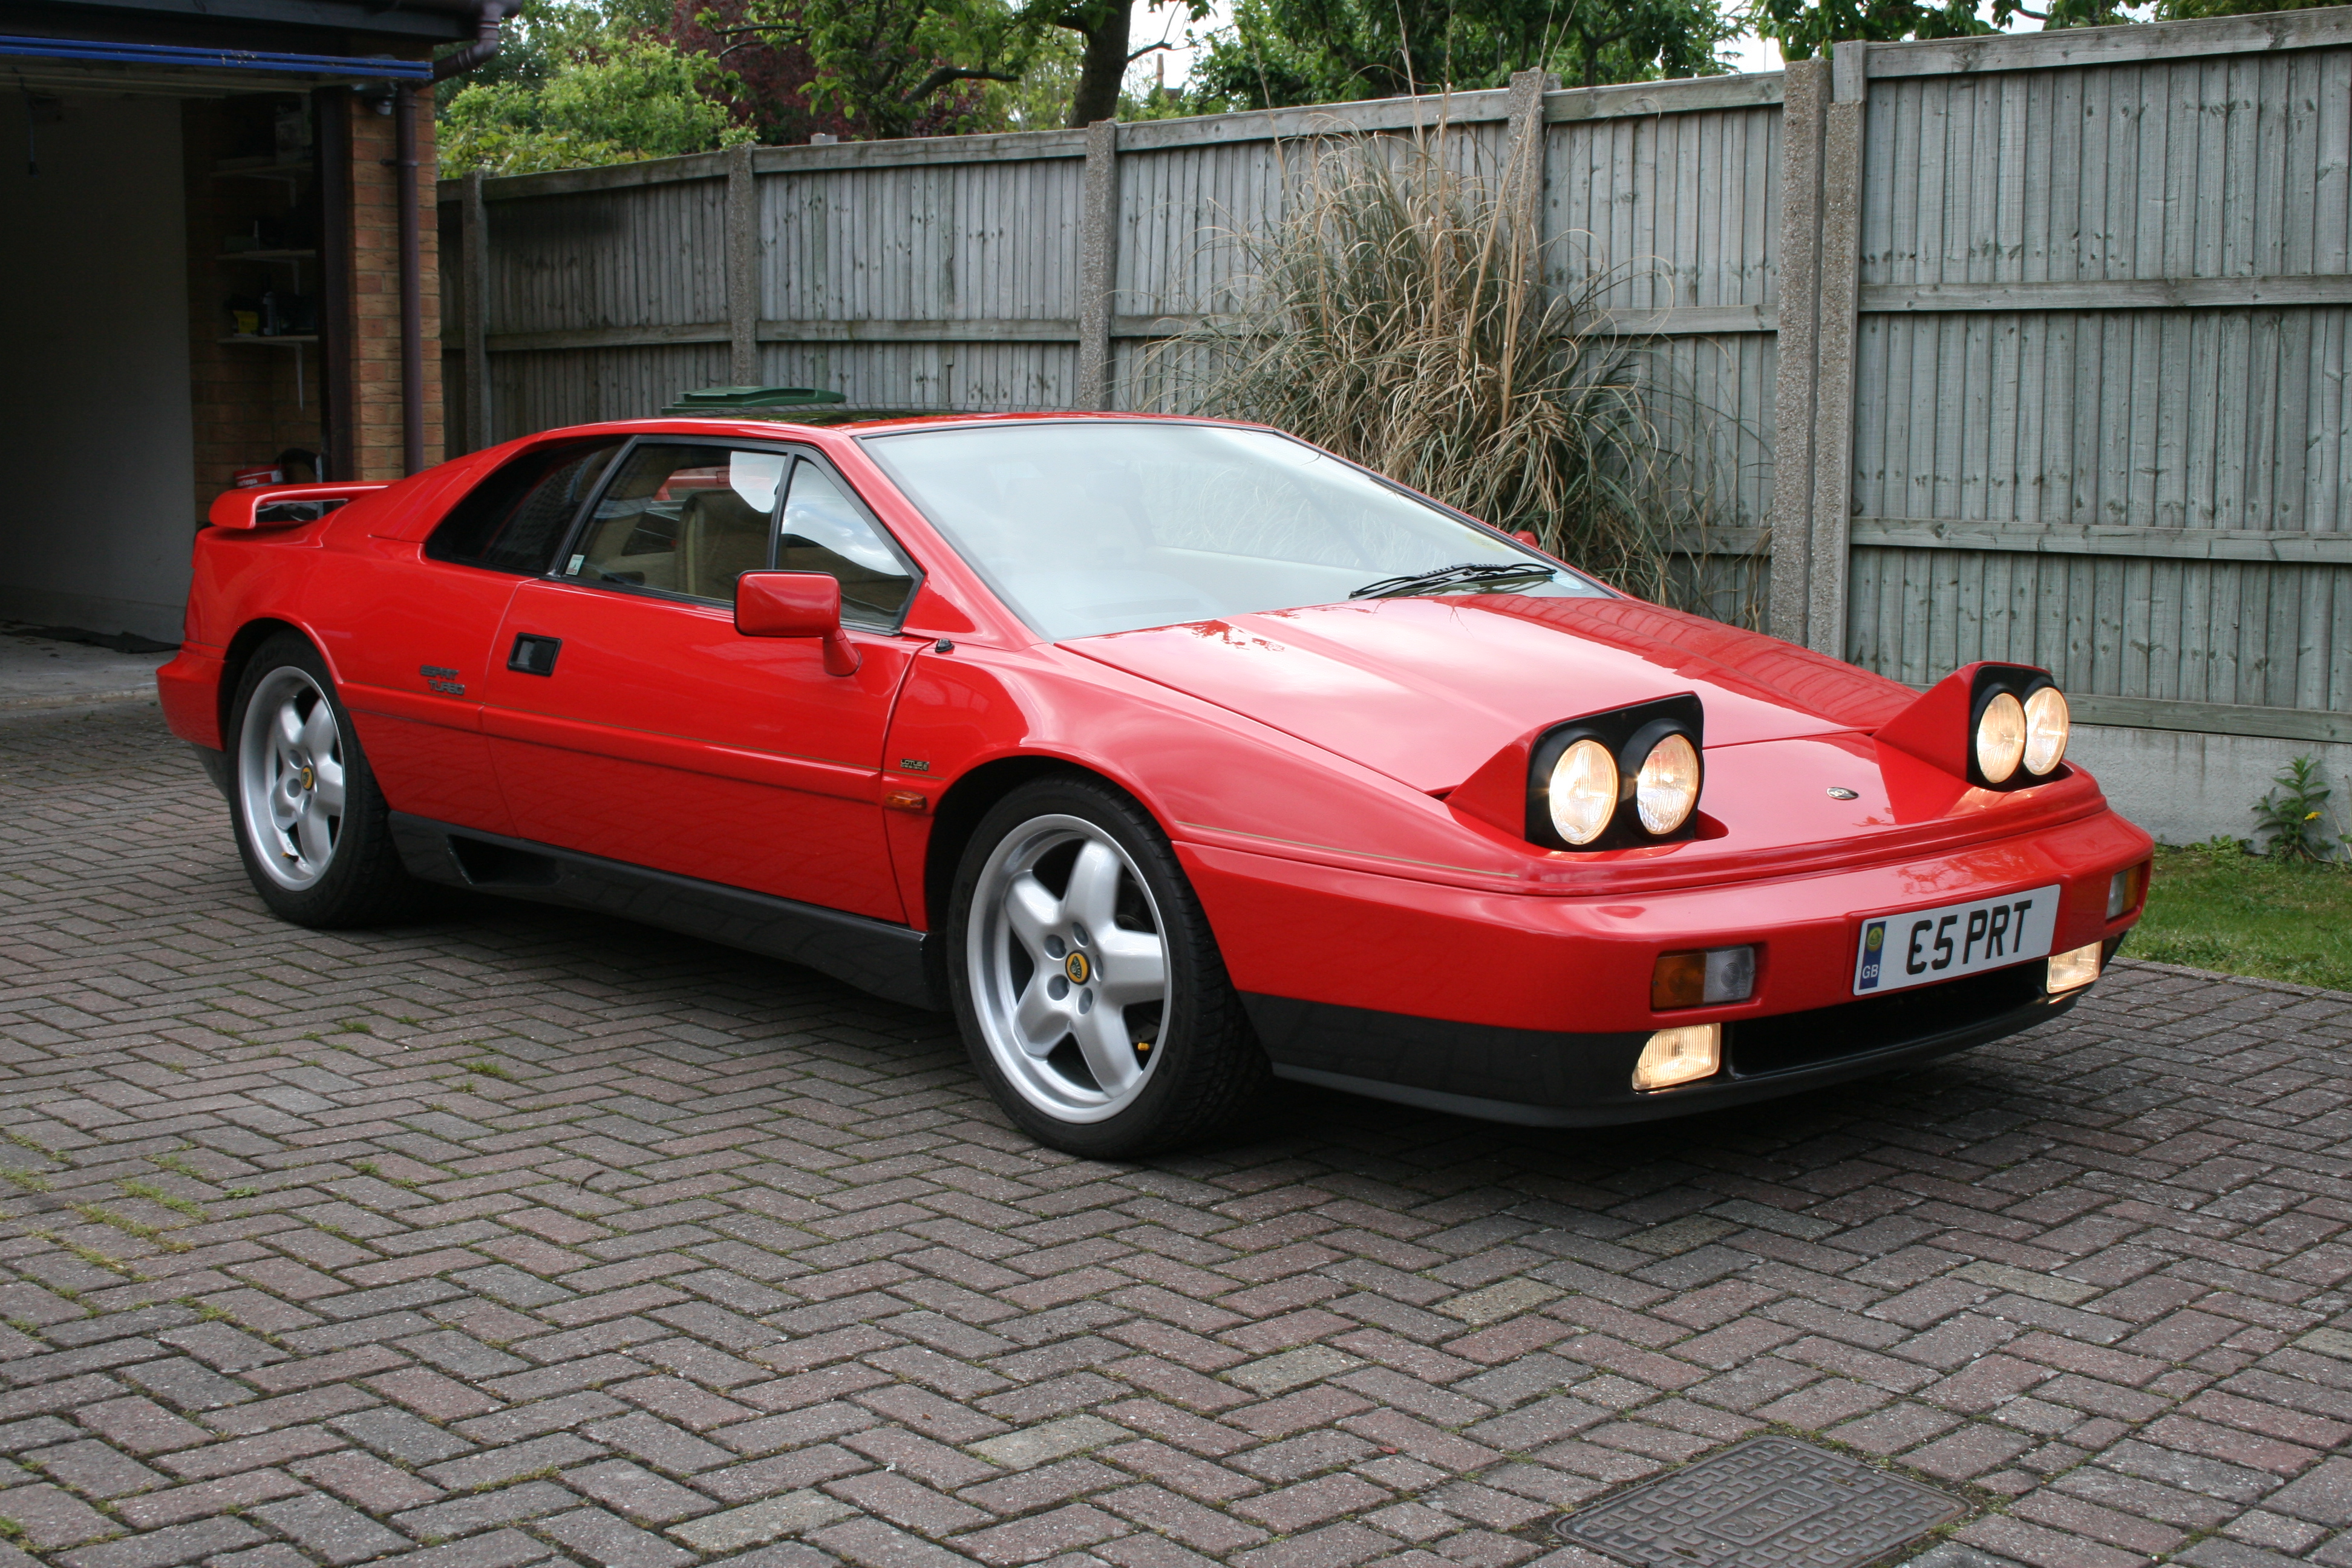 lotus esprit related images,401 to 450 - Zuoda Images